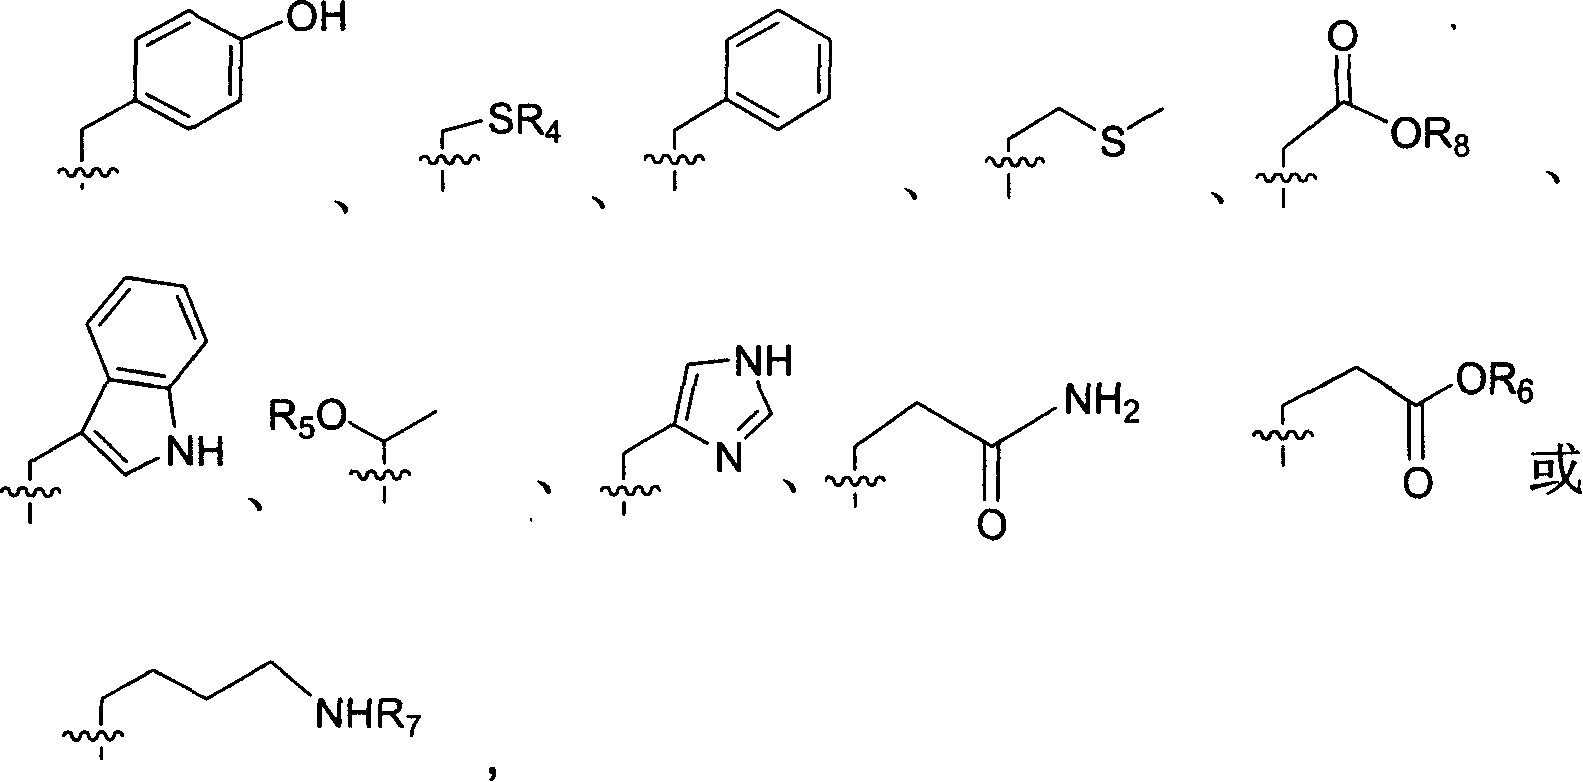 Precursor of key intermediate of AG 7088 class compound and its sythetic process